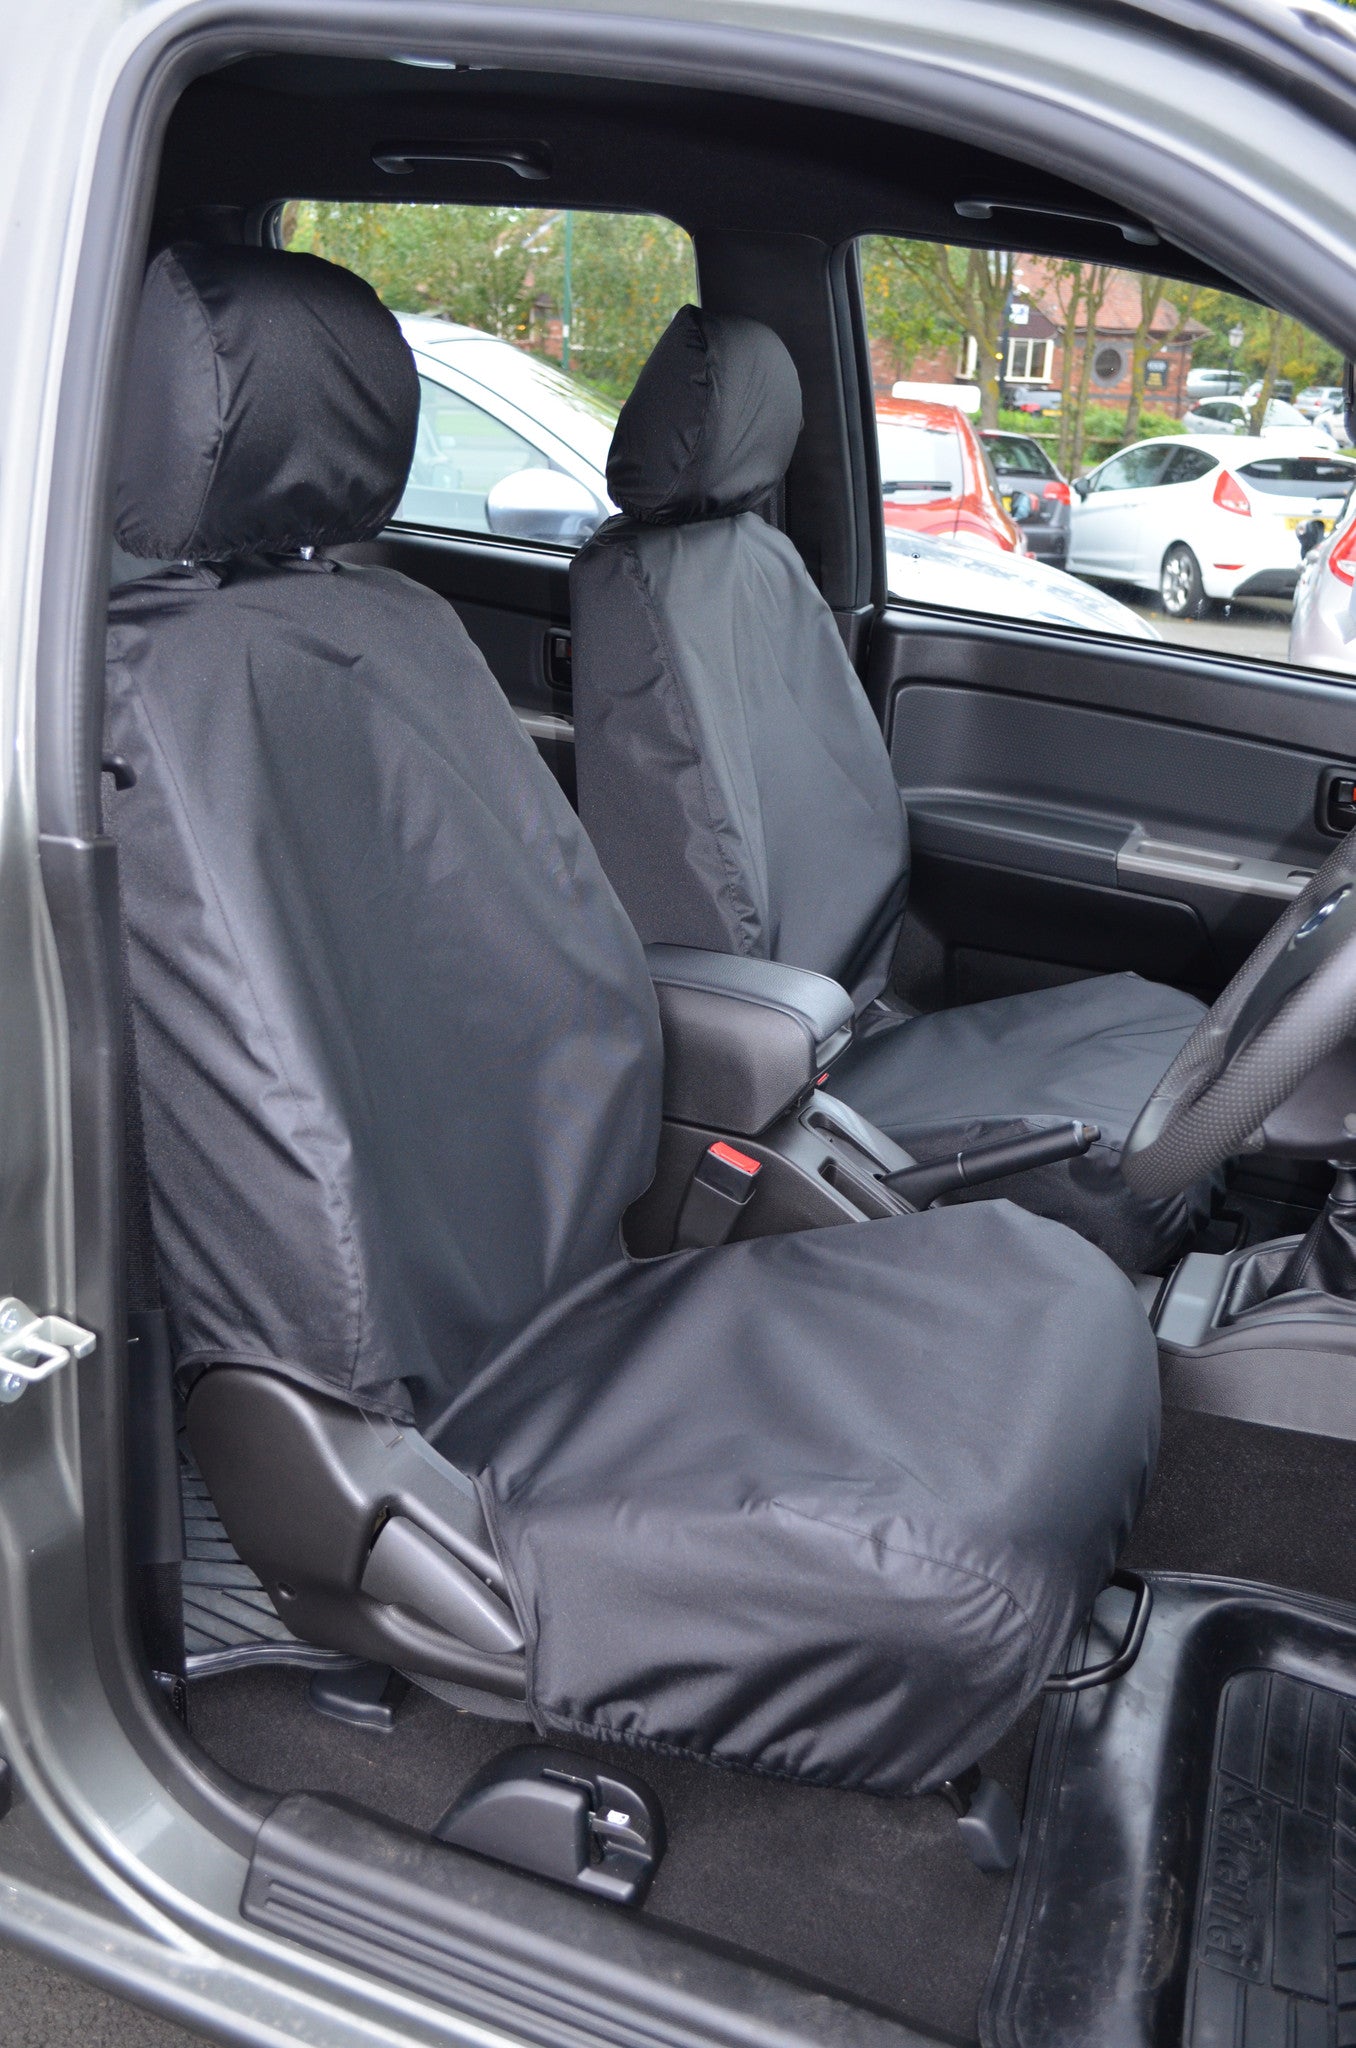 Isuzu Rodeo 2003 to 2012 Seat Covers Front Pair Seat Covers / Black Turtle Covers Ltd